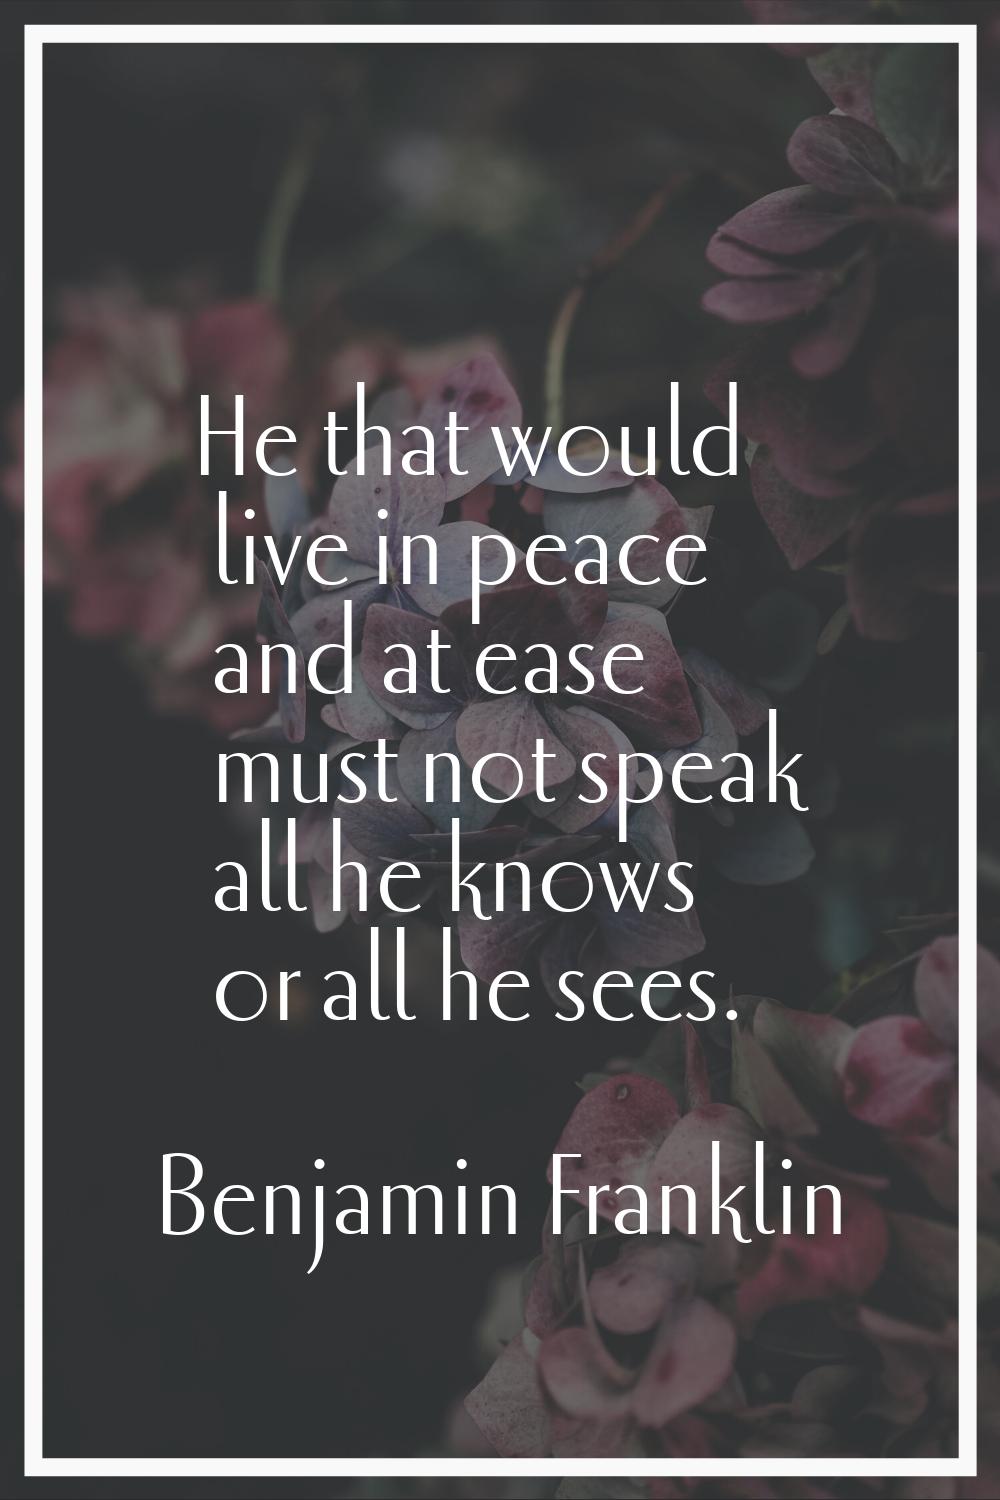 He that would live in peace and at ease must not speak all he knows or all he sees.